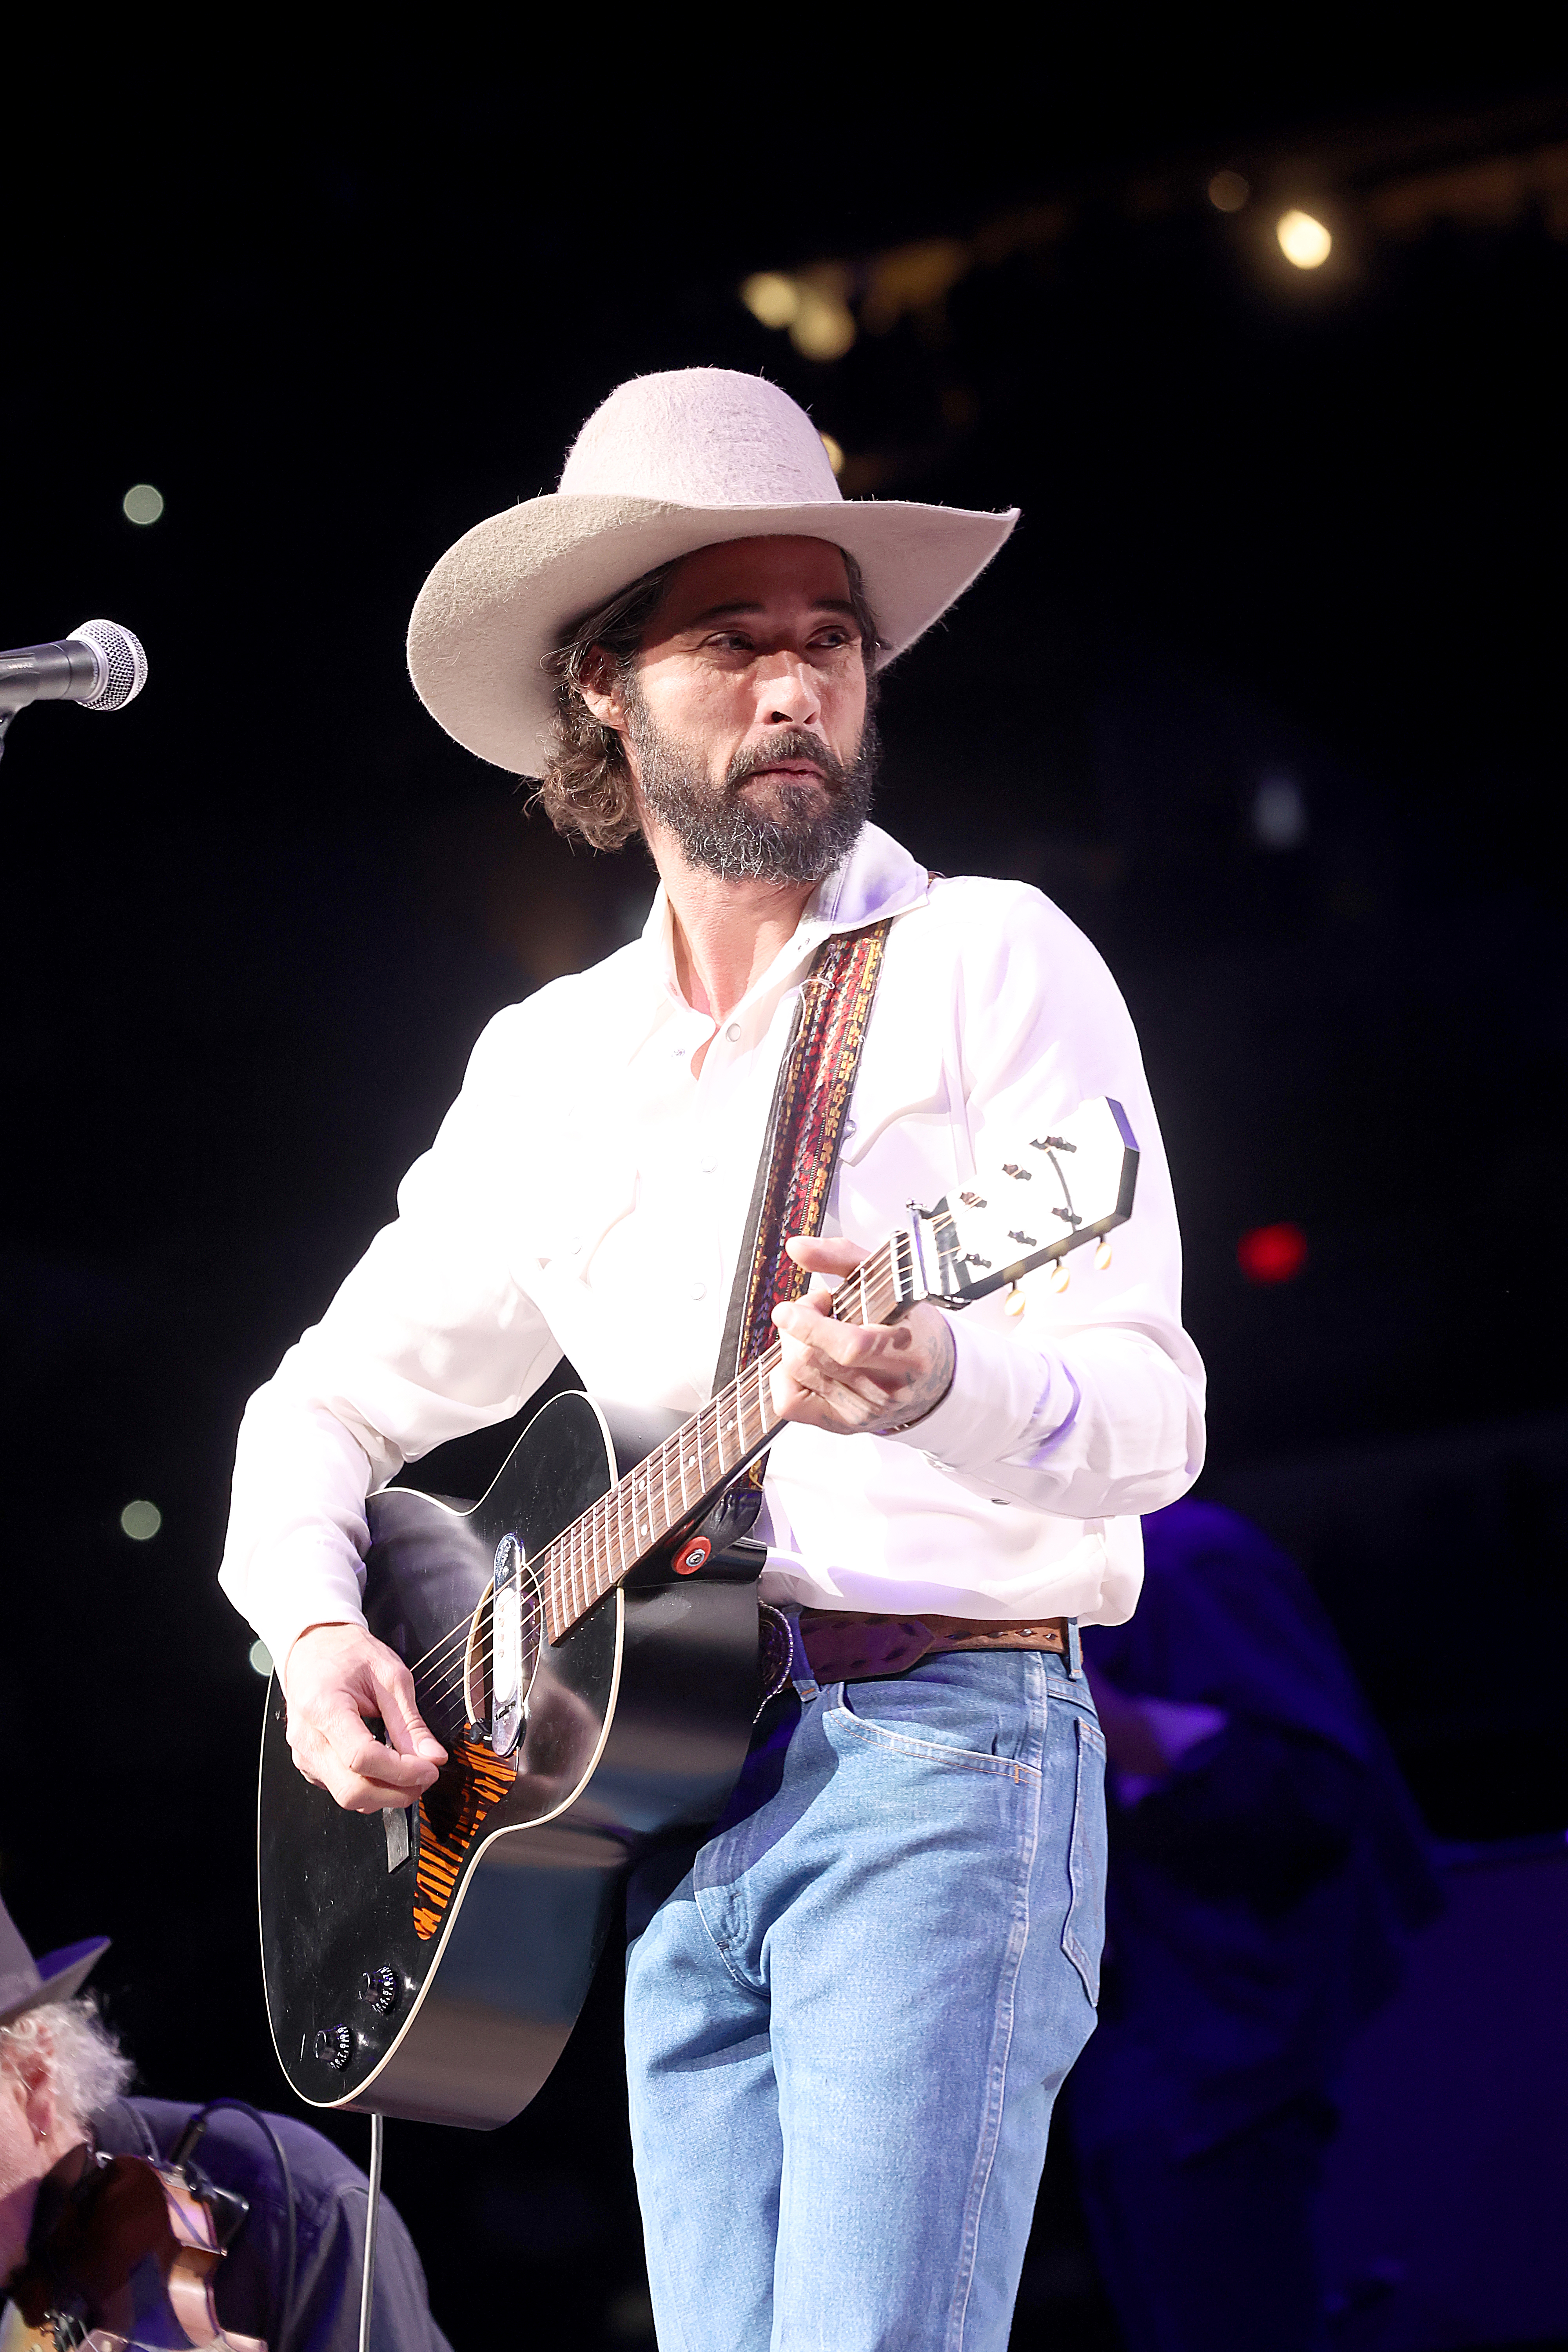 Ryan Bingham performs in concert at the San Antonio Stock Show & Rodeo at AT&T Center on February 9, 2023, in San Antonio, Texas | Source: Getty Images